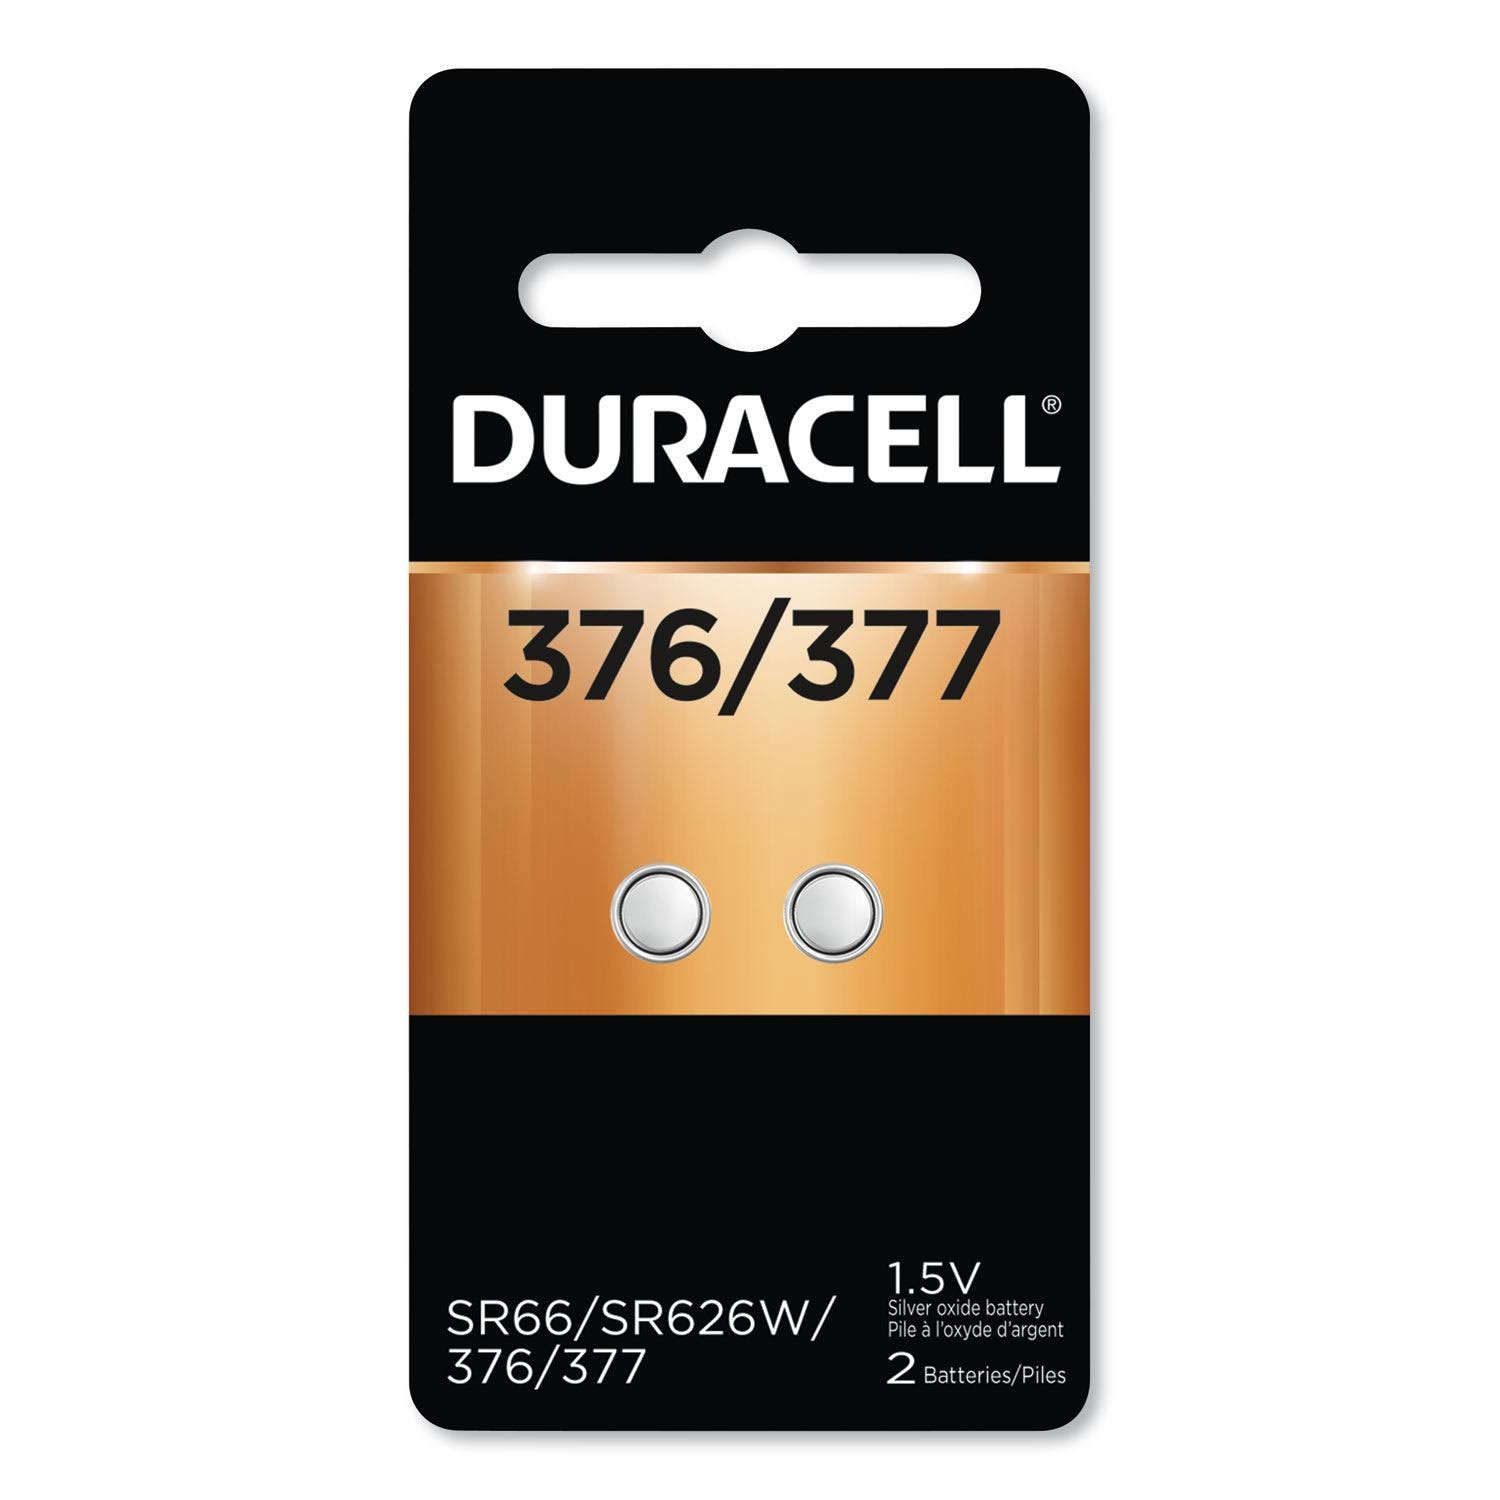 Duracell Long-Lasting Silver Oxide Button Batteries - 376/377, 2-Pack | Image